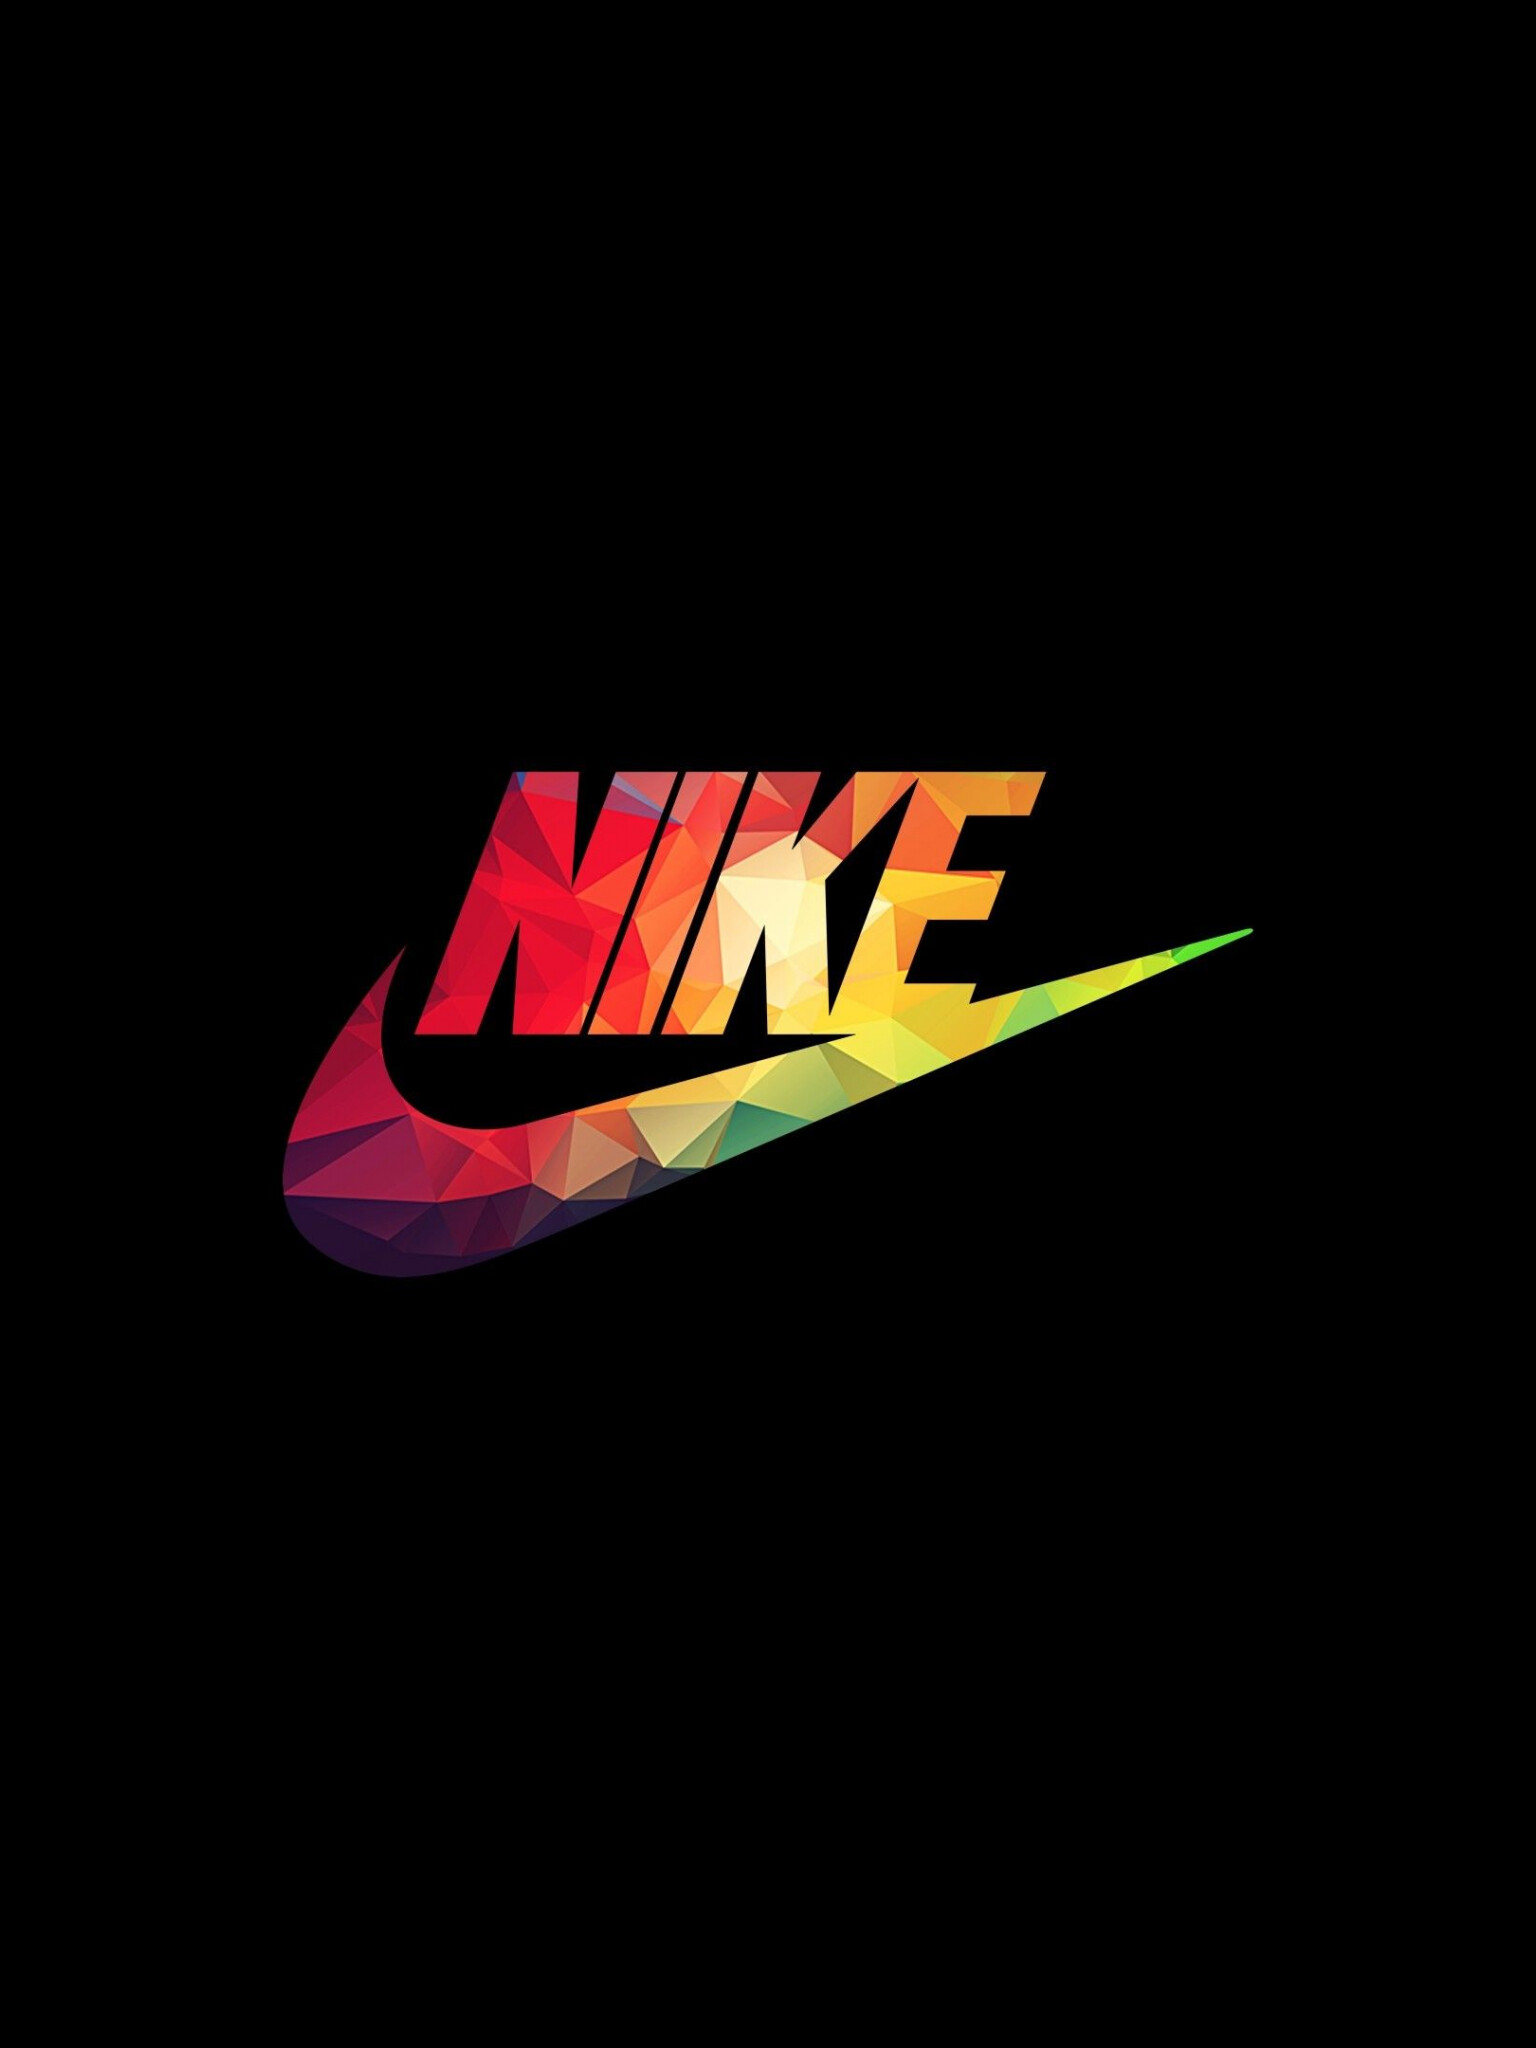 Nike: One of the most recognized logos in the world, Corporate trademark. 1540x2050 HD Wallpaper.